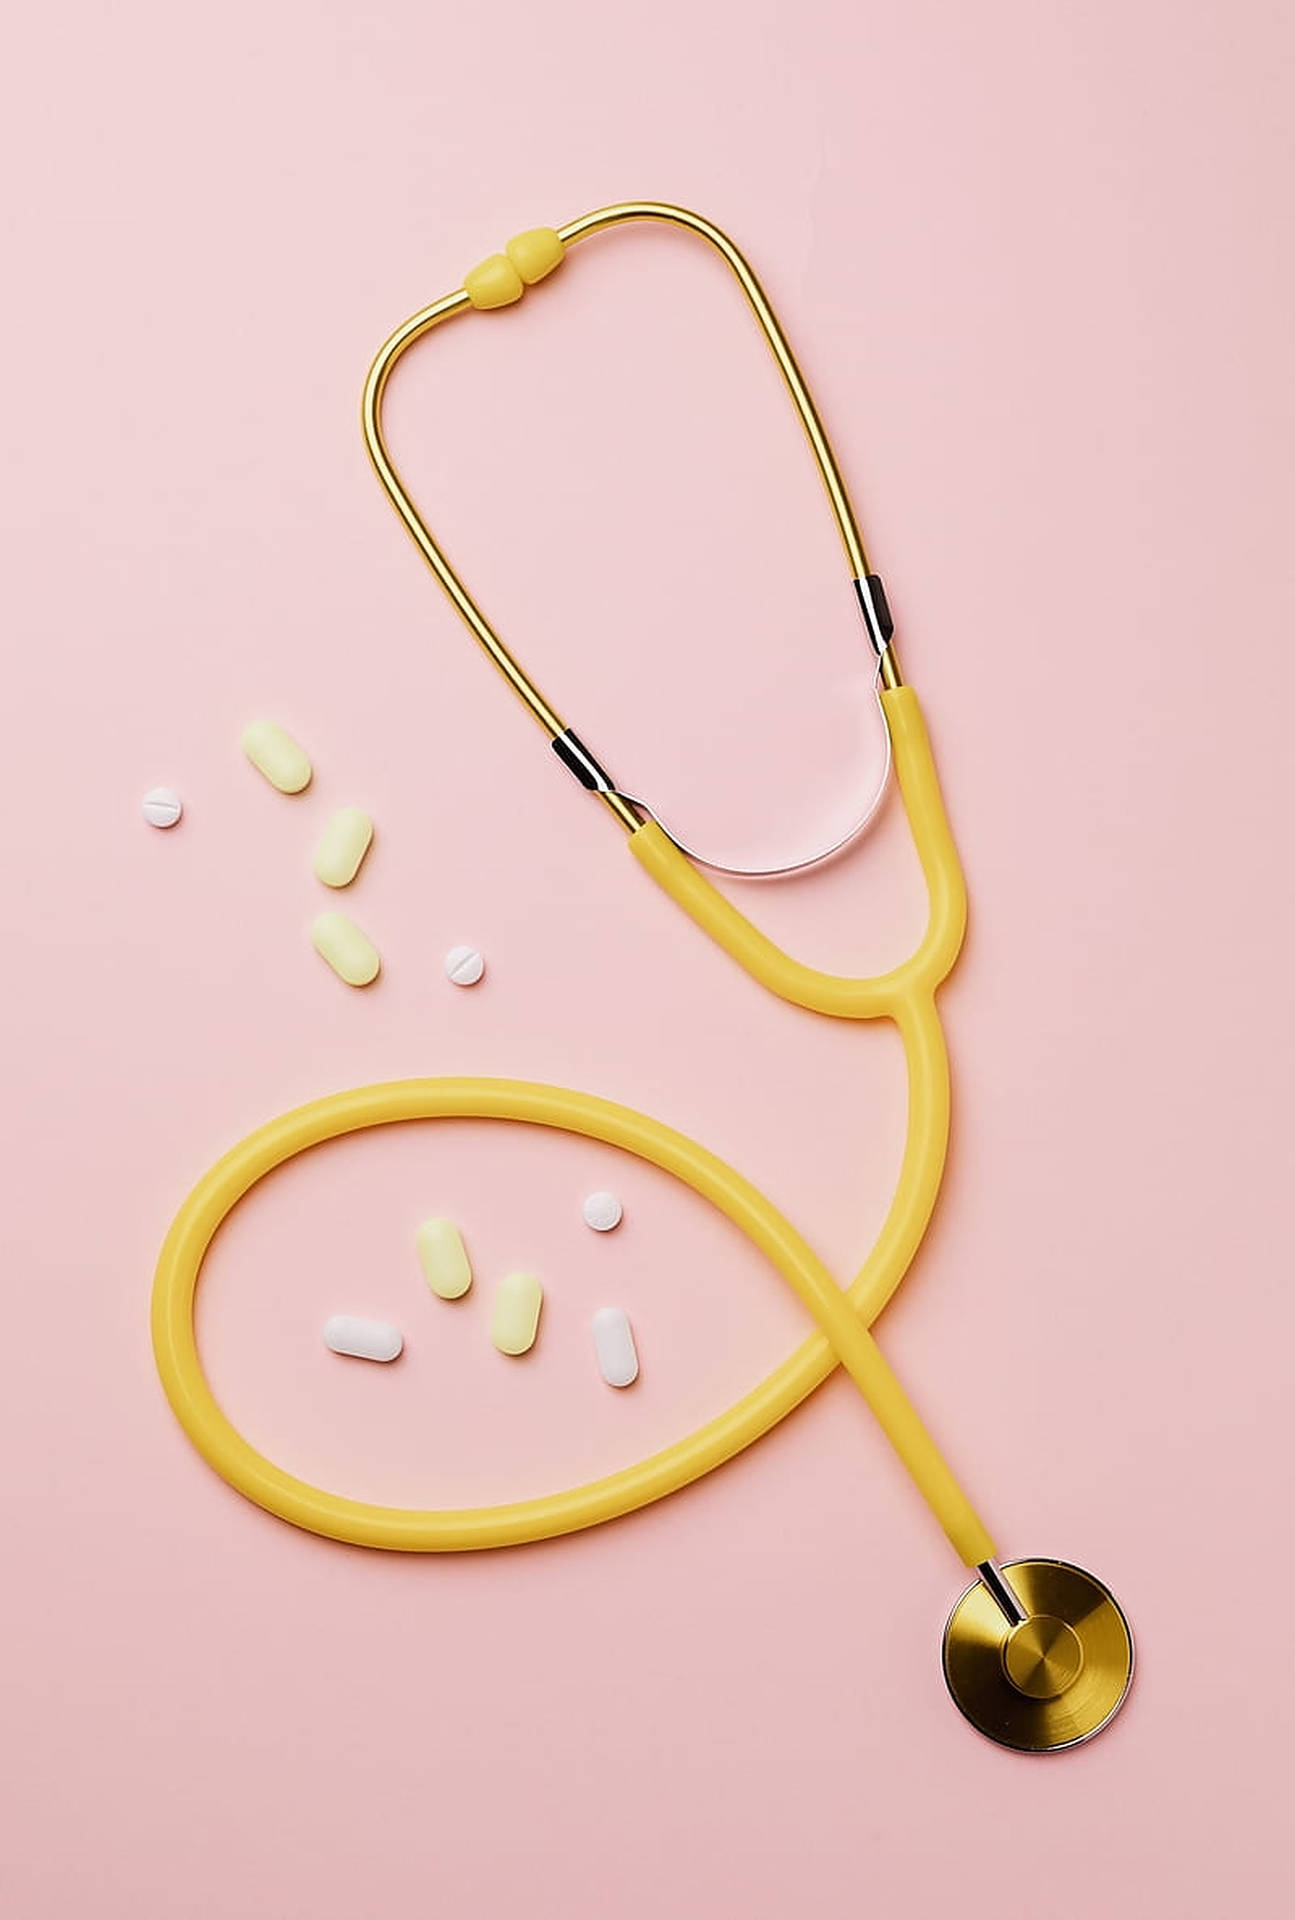 Experienced Doctor Wearing A Yellow Stethoscope Background